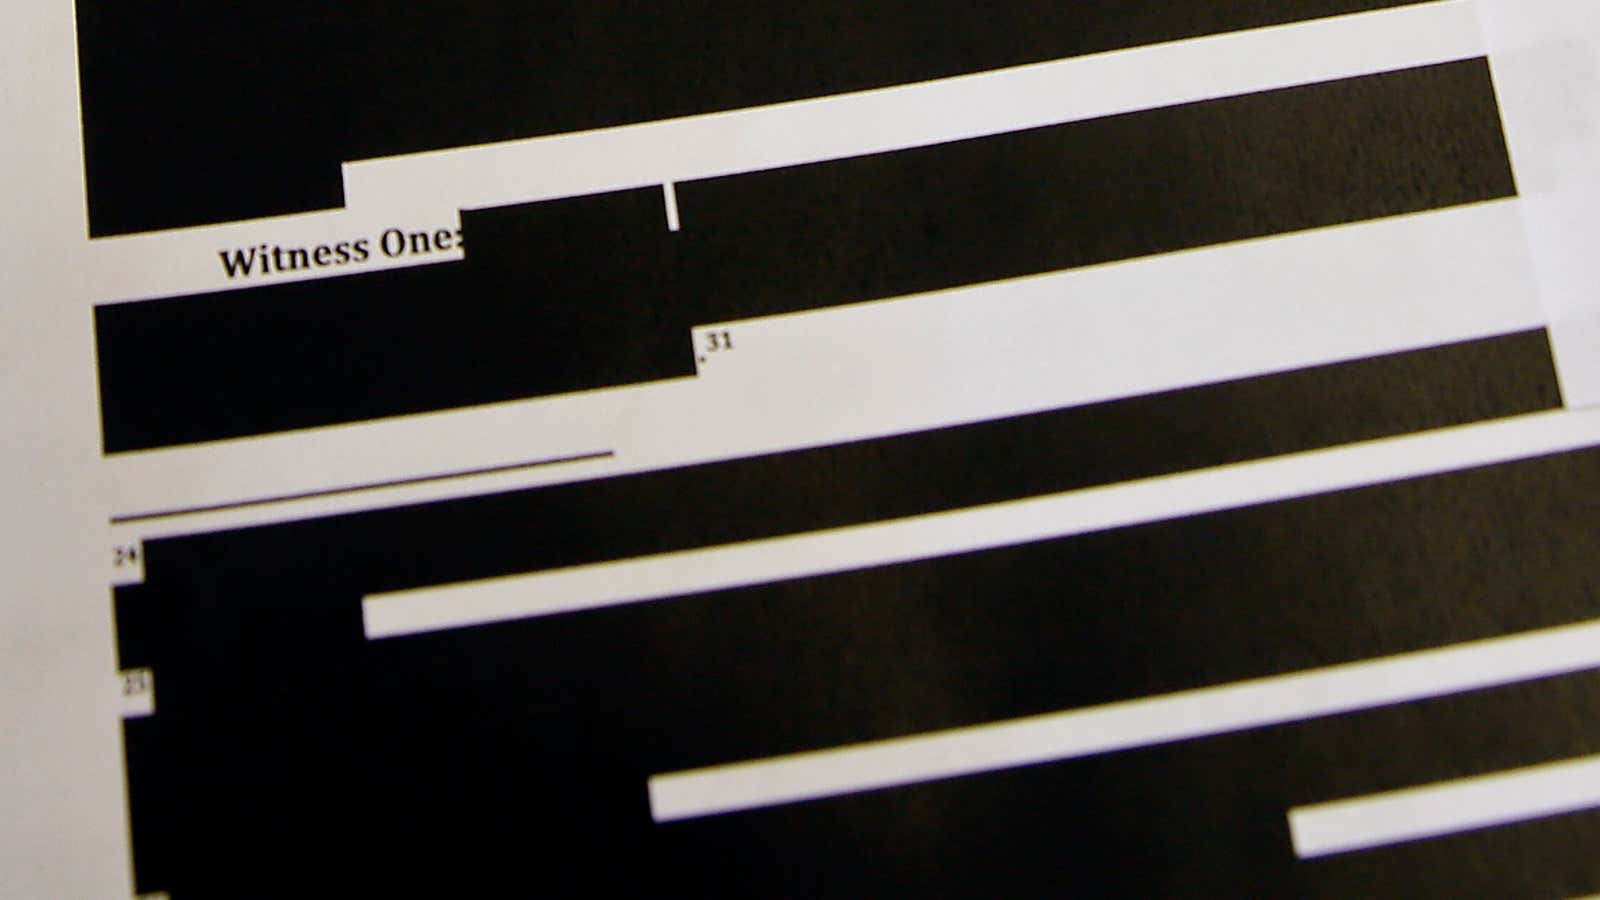 What redaction looks like.